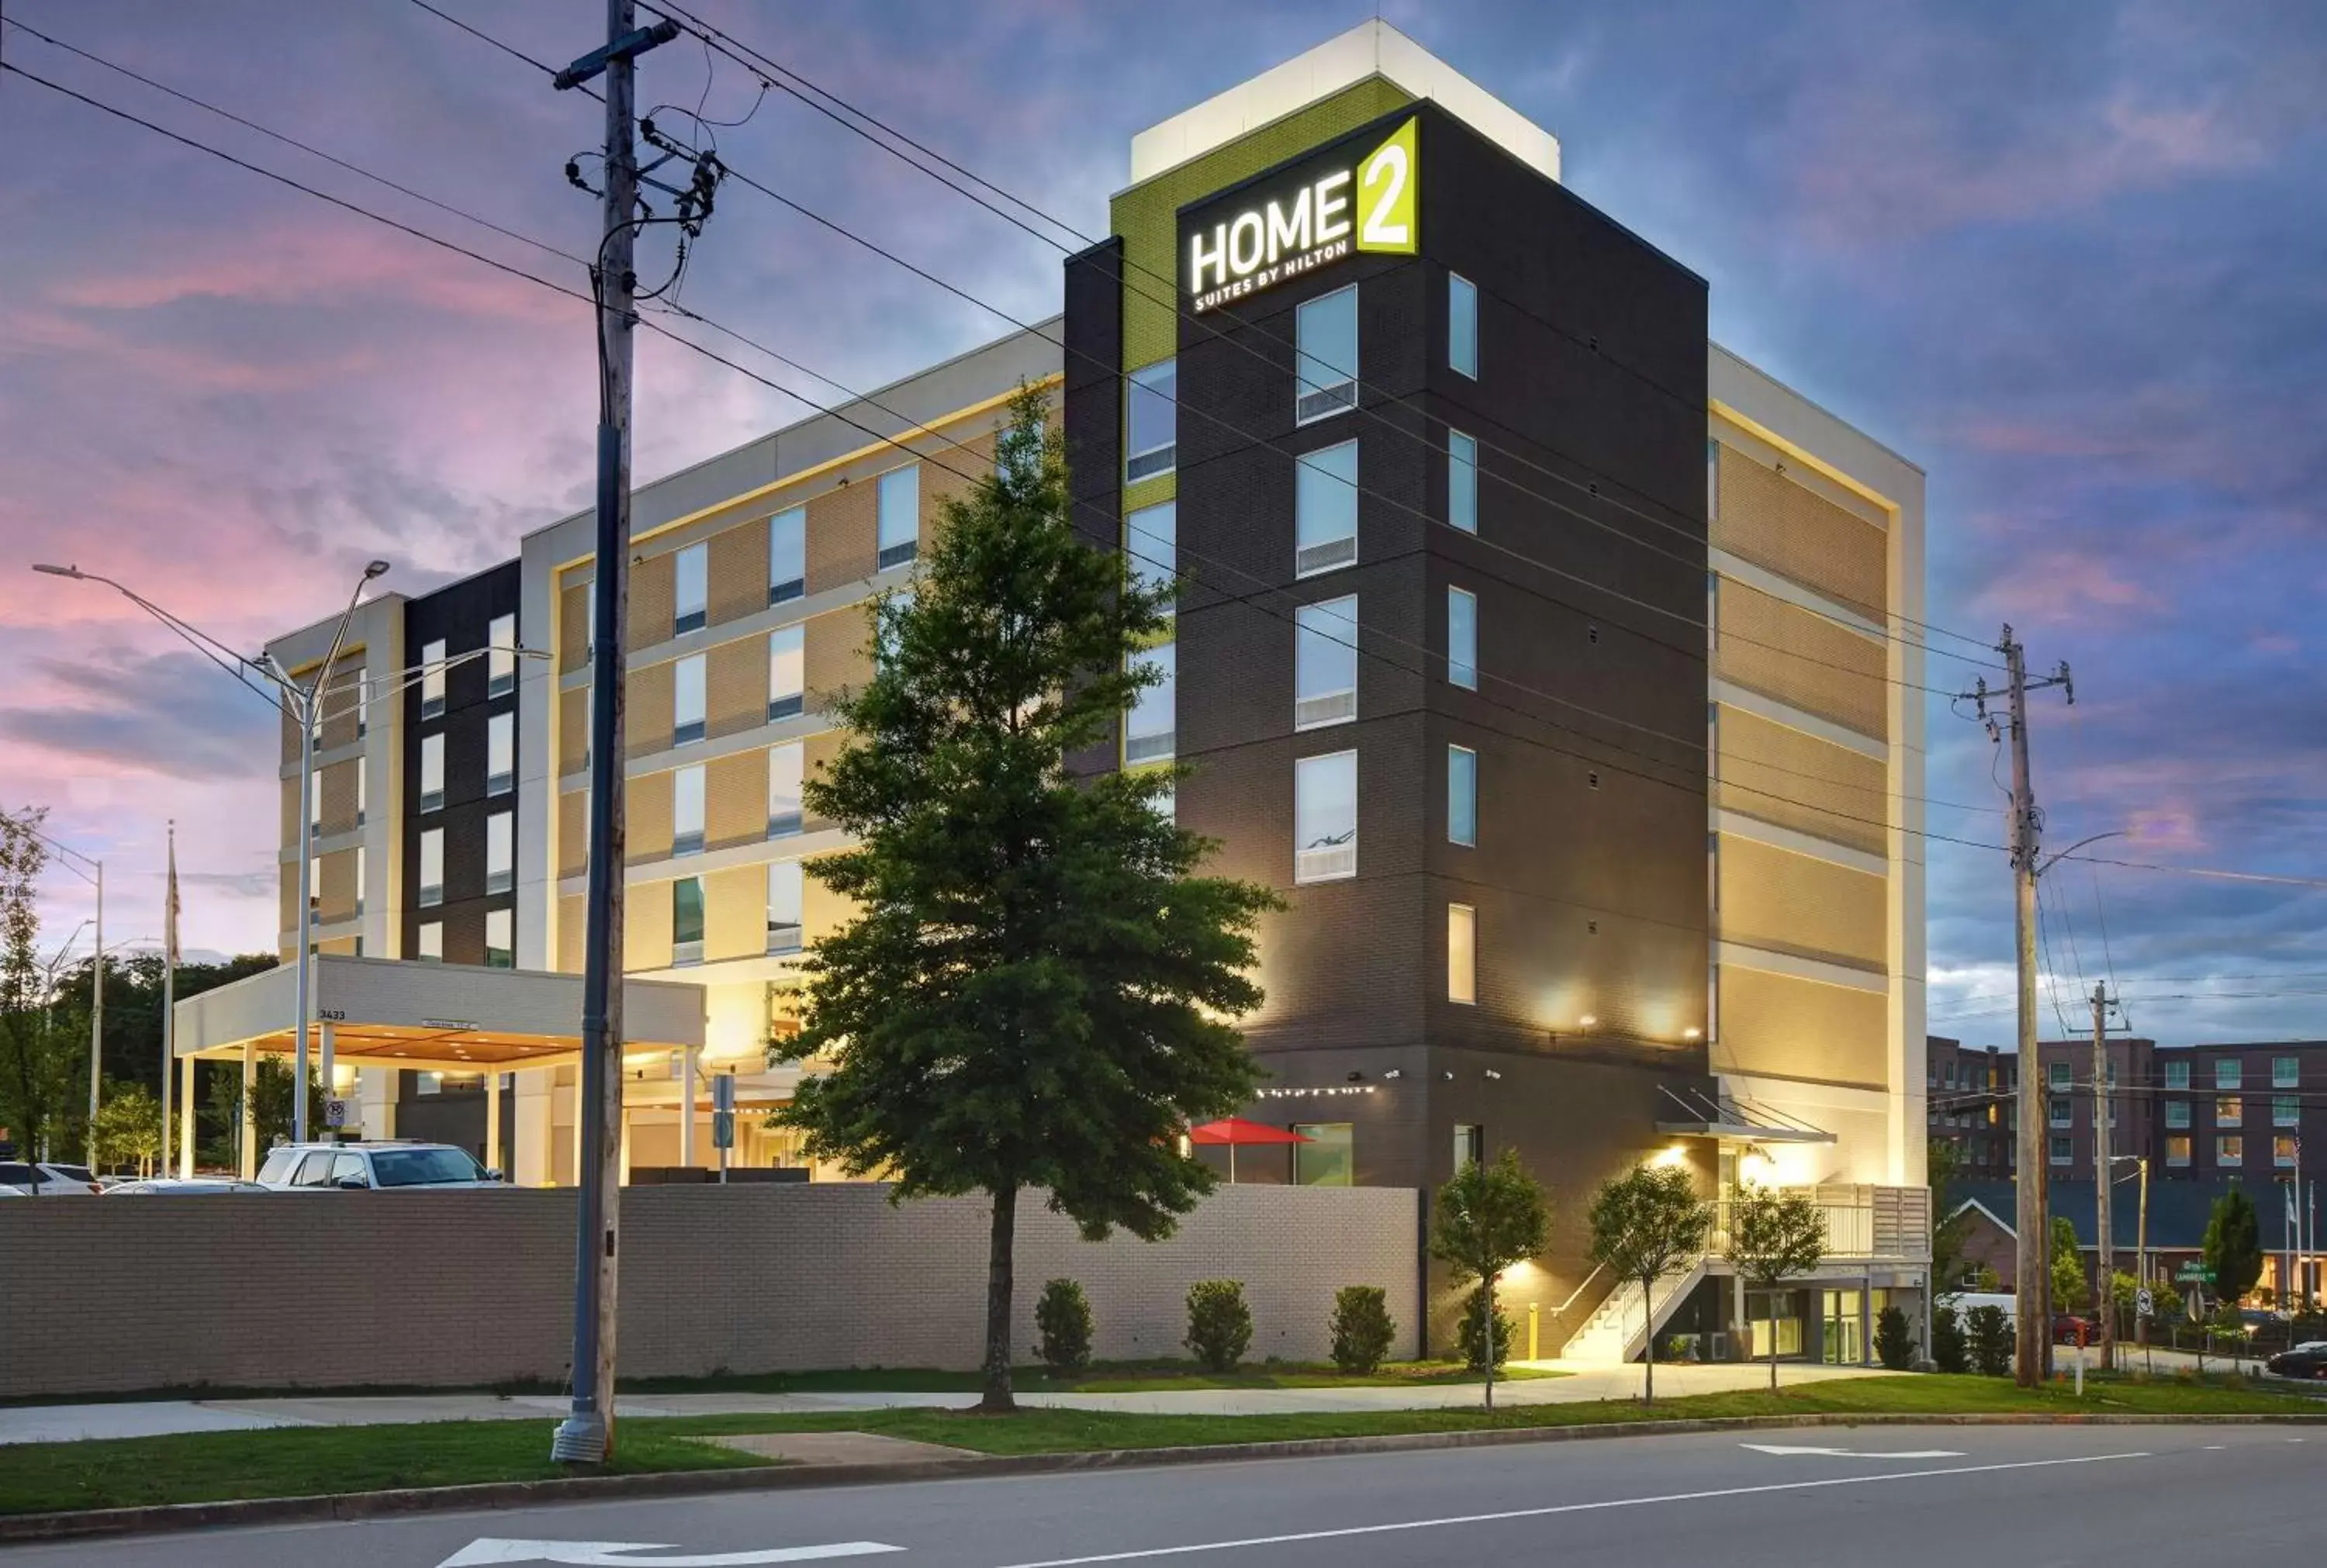 Property Building in Home2 Suites by Hilton Atlanta Airport North